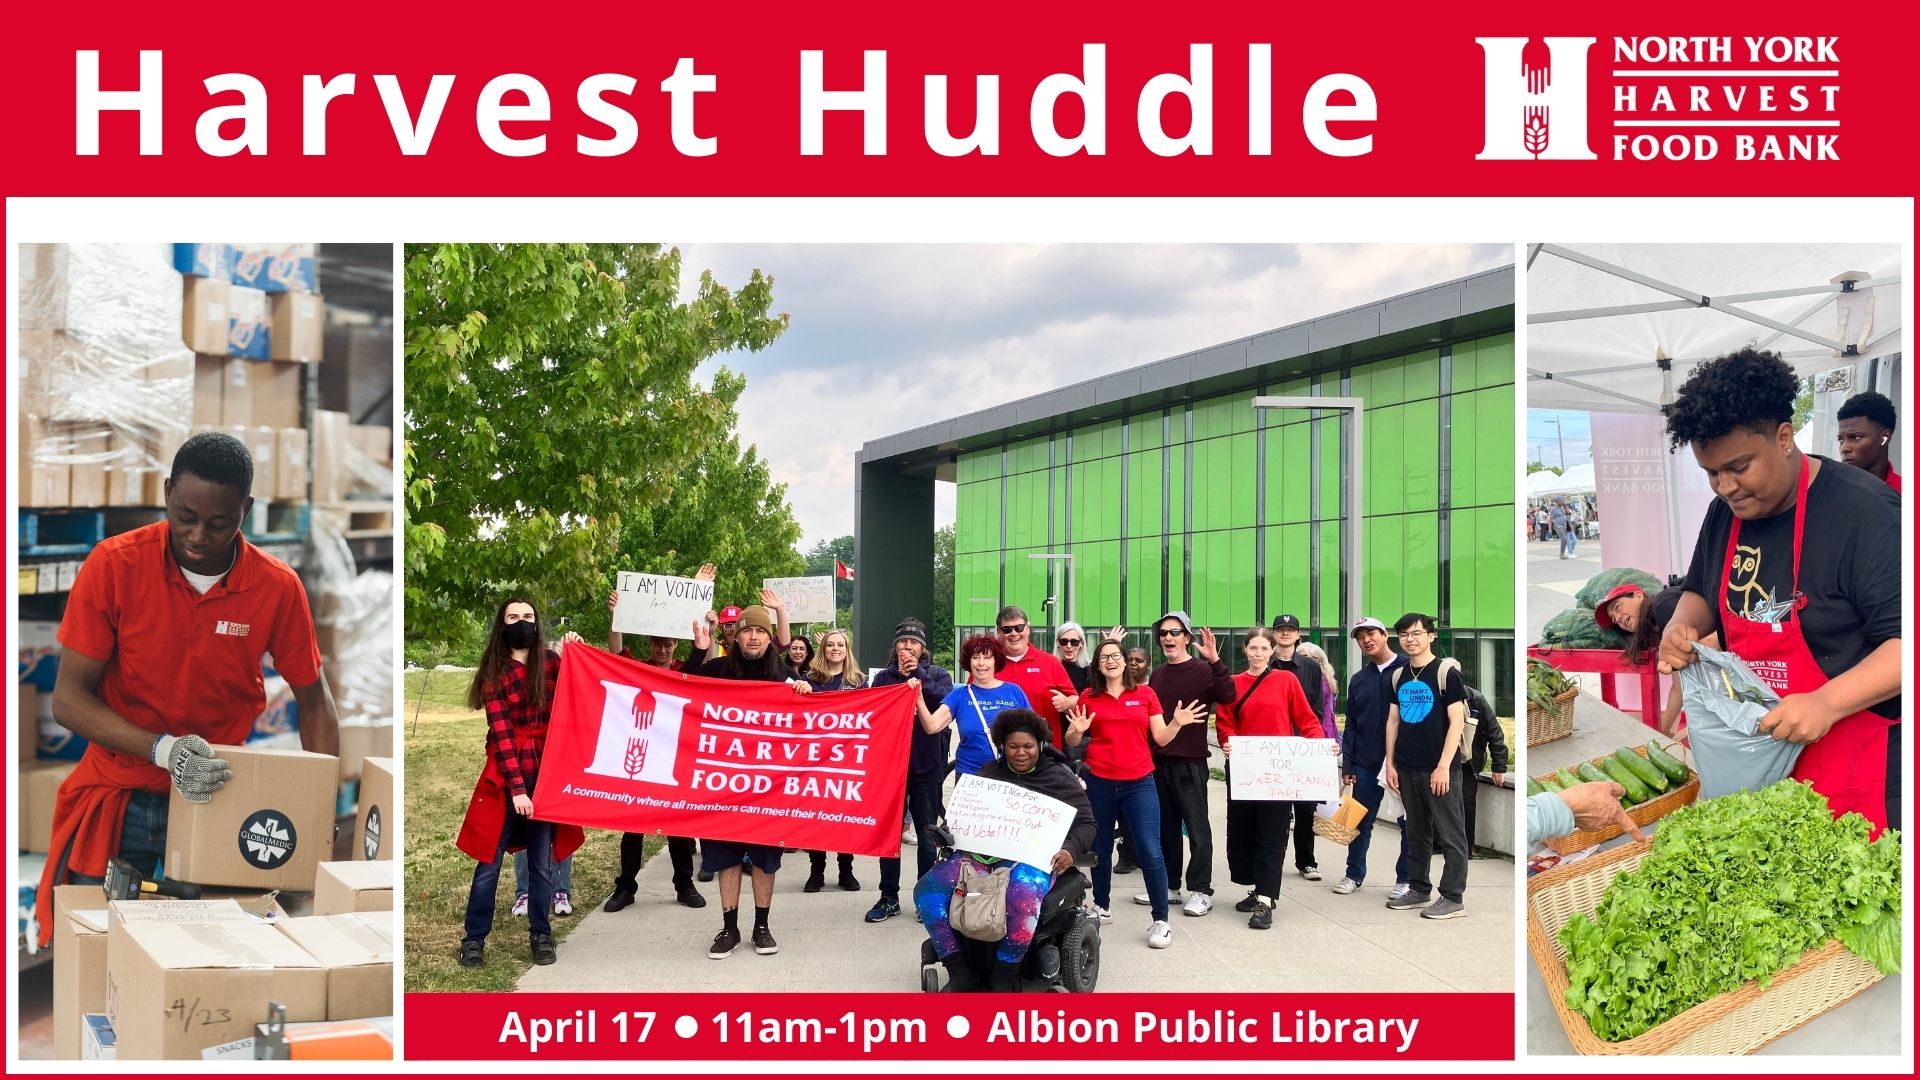 Images of staff with text "Join the Harvest Huddle on April 17 at Albion Library"